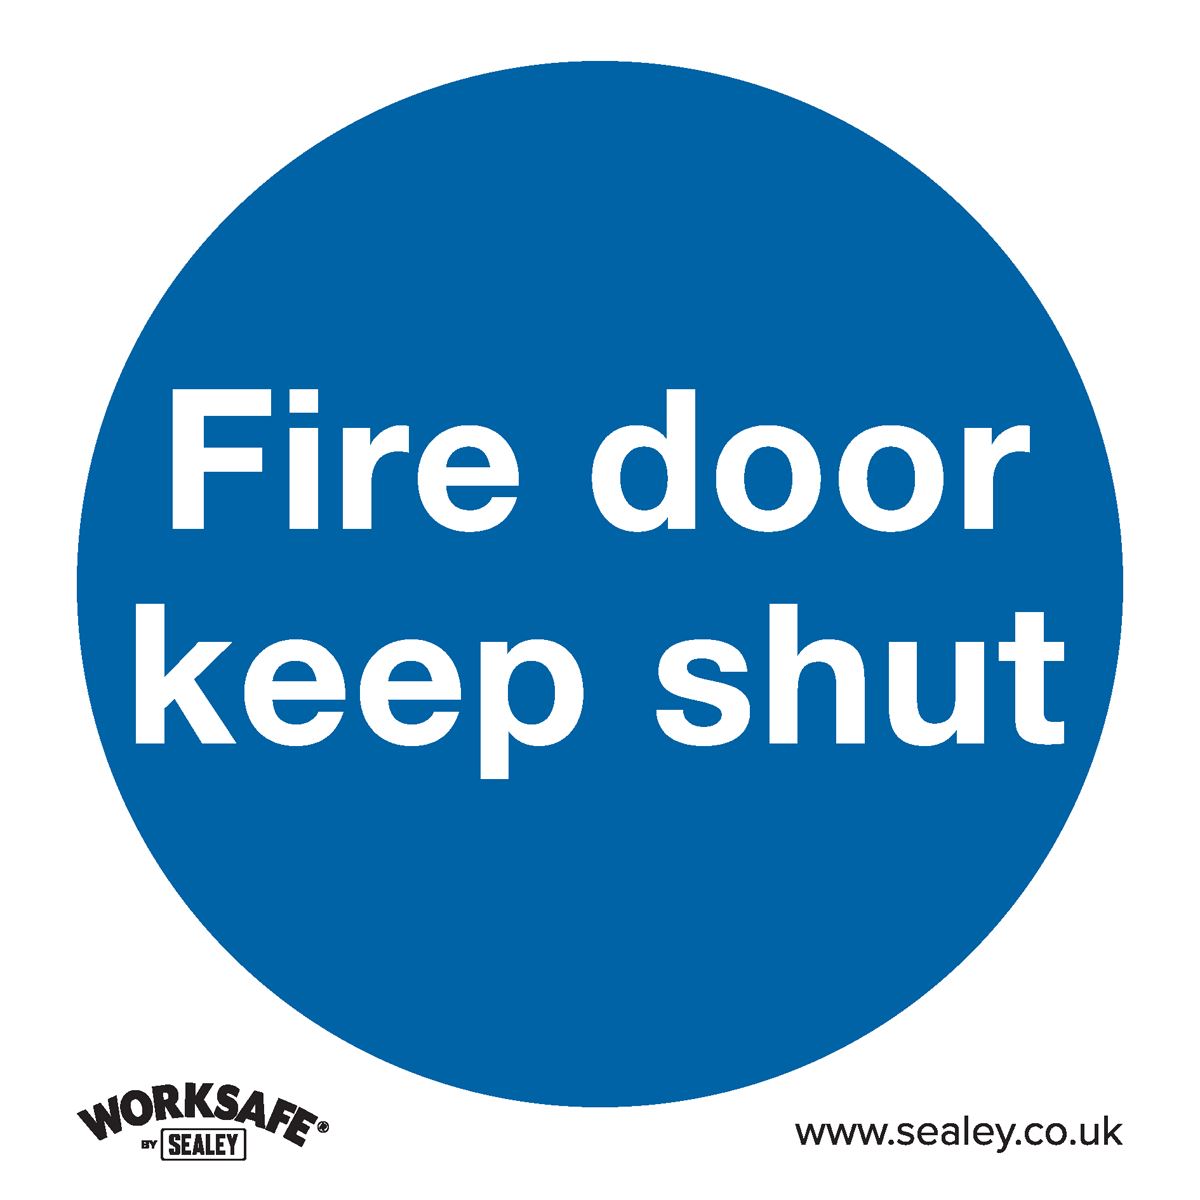 Worksafe by Sealey Mandatory Safety Sign - Fire Door Keep Shut - Self-Adhesive Vinyl